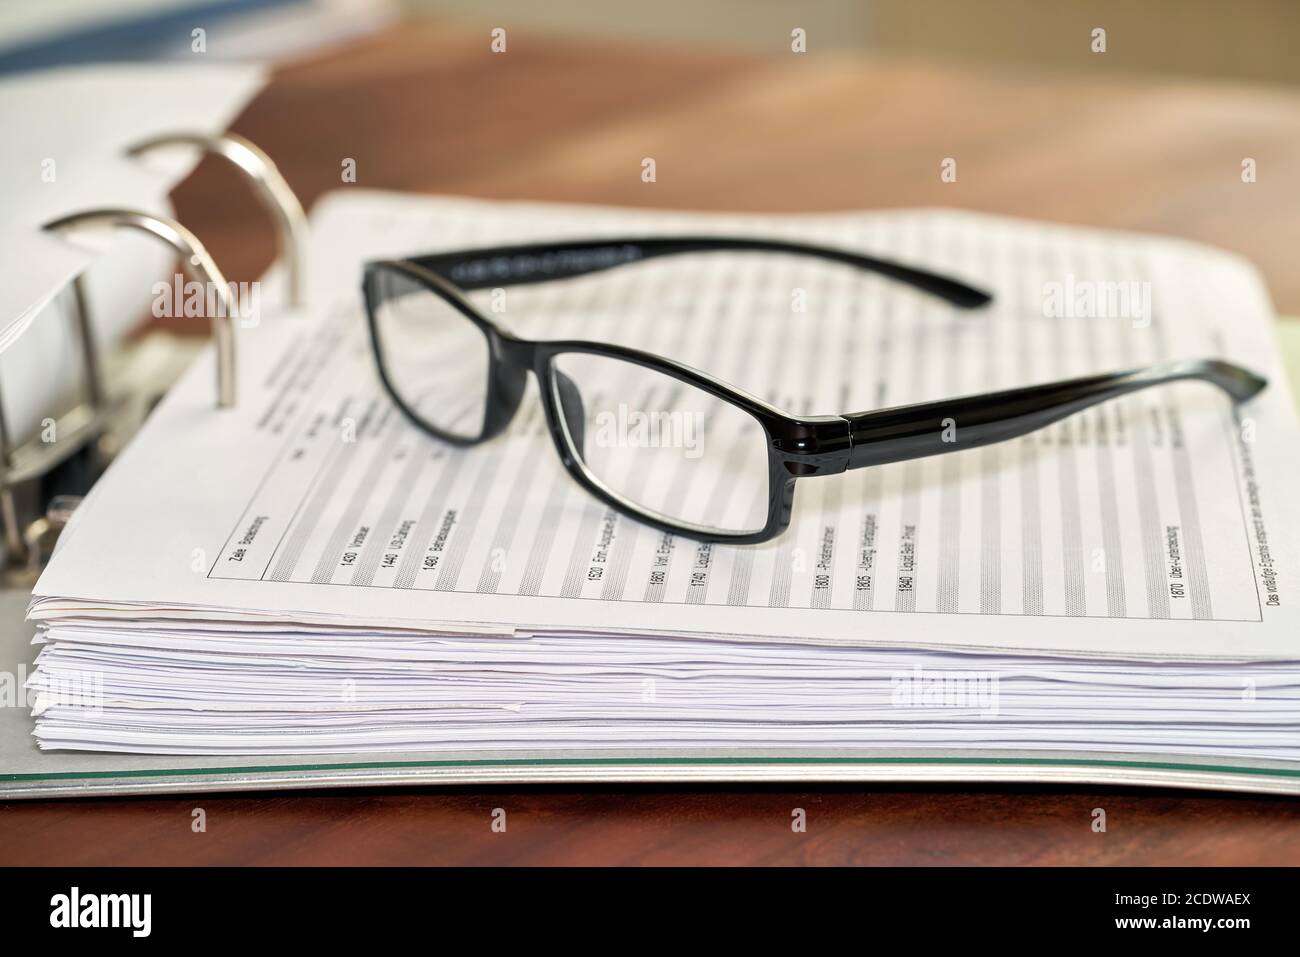 Glasses on a file folder in an office Stock Photo